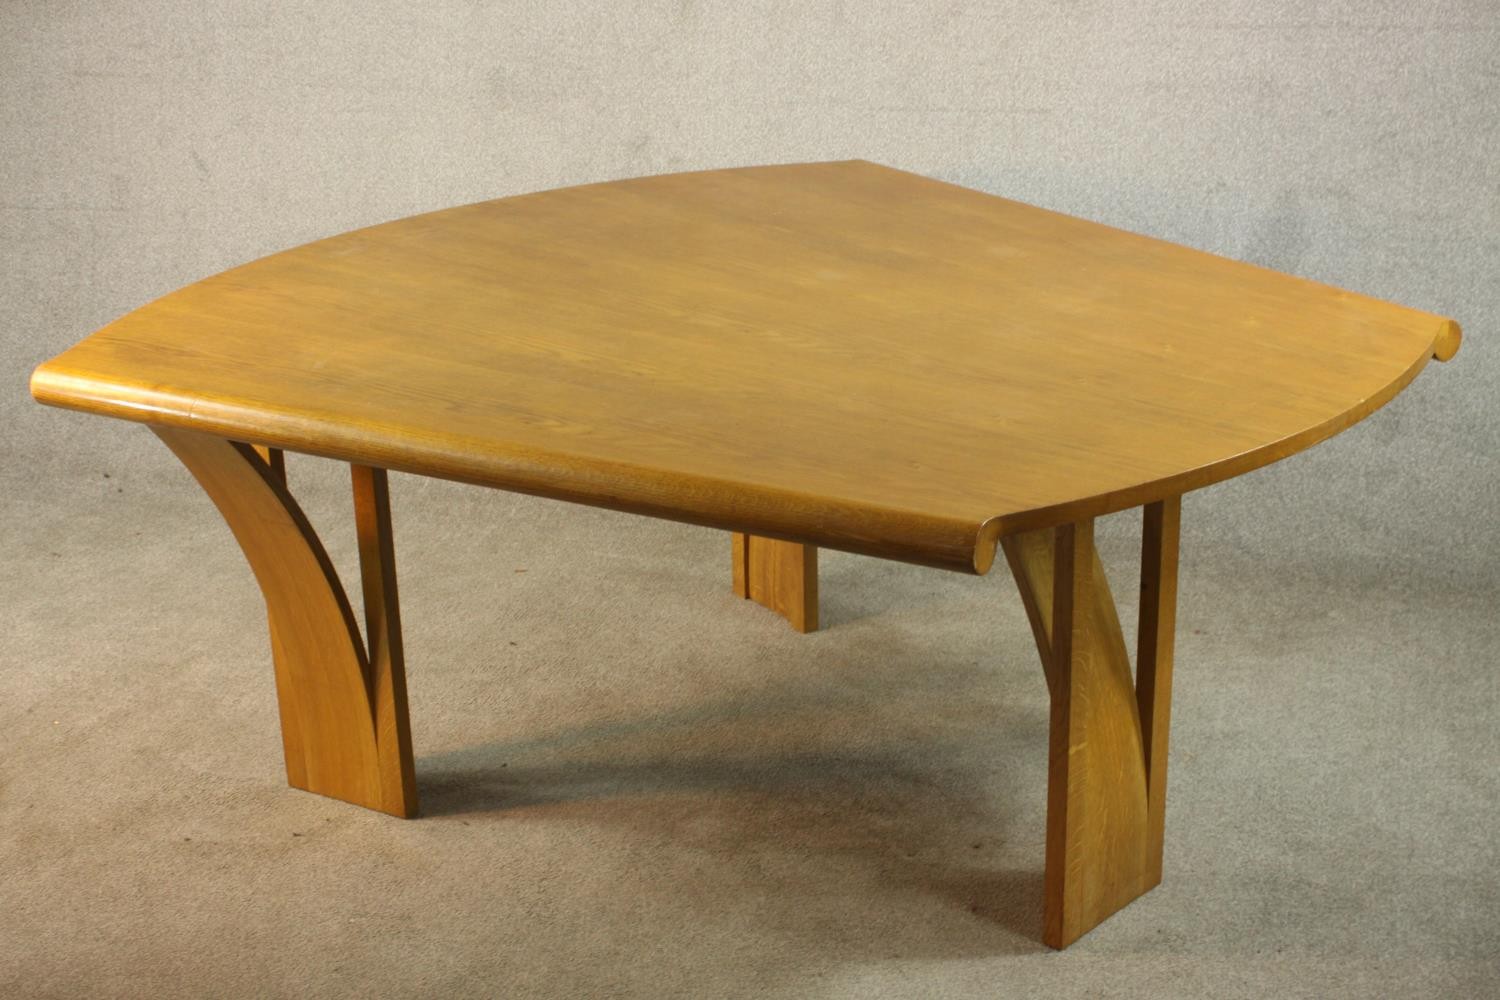 Attributed to Robert Williams (b.1942) for Pearl Dot, Islington, an oak dining table, circa 1980s, - Image 12 of 15